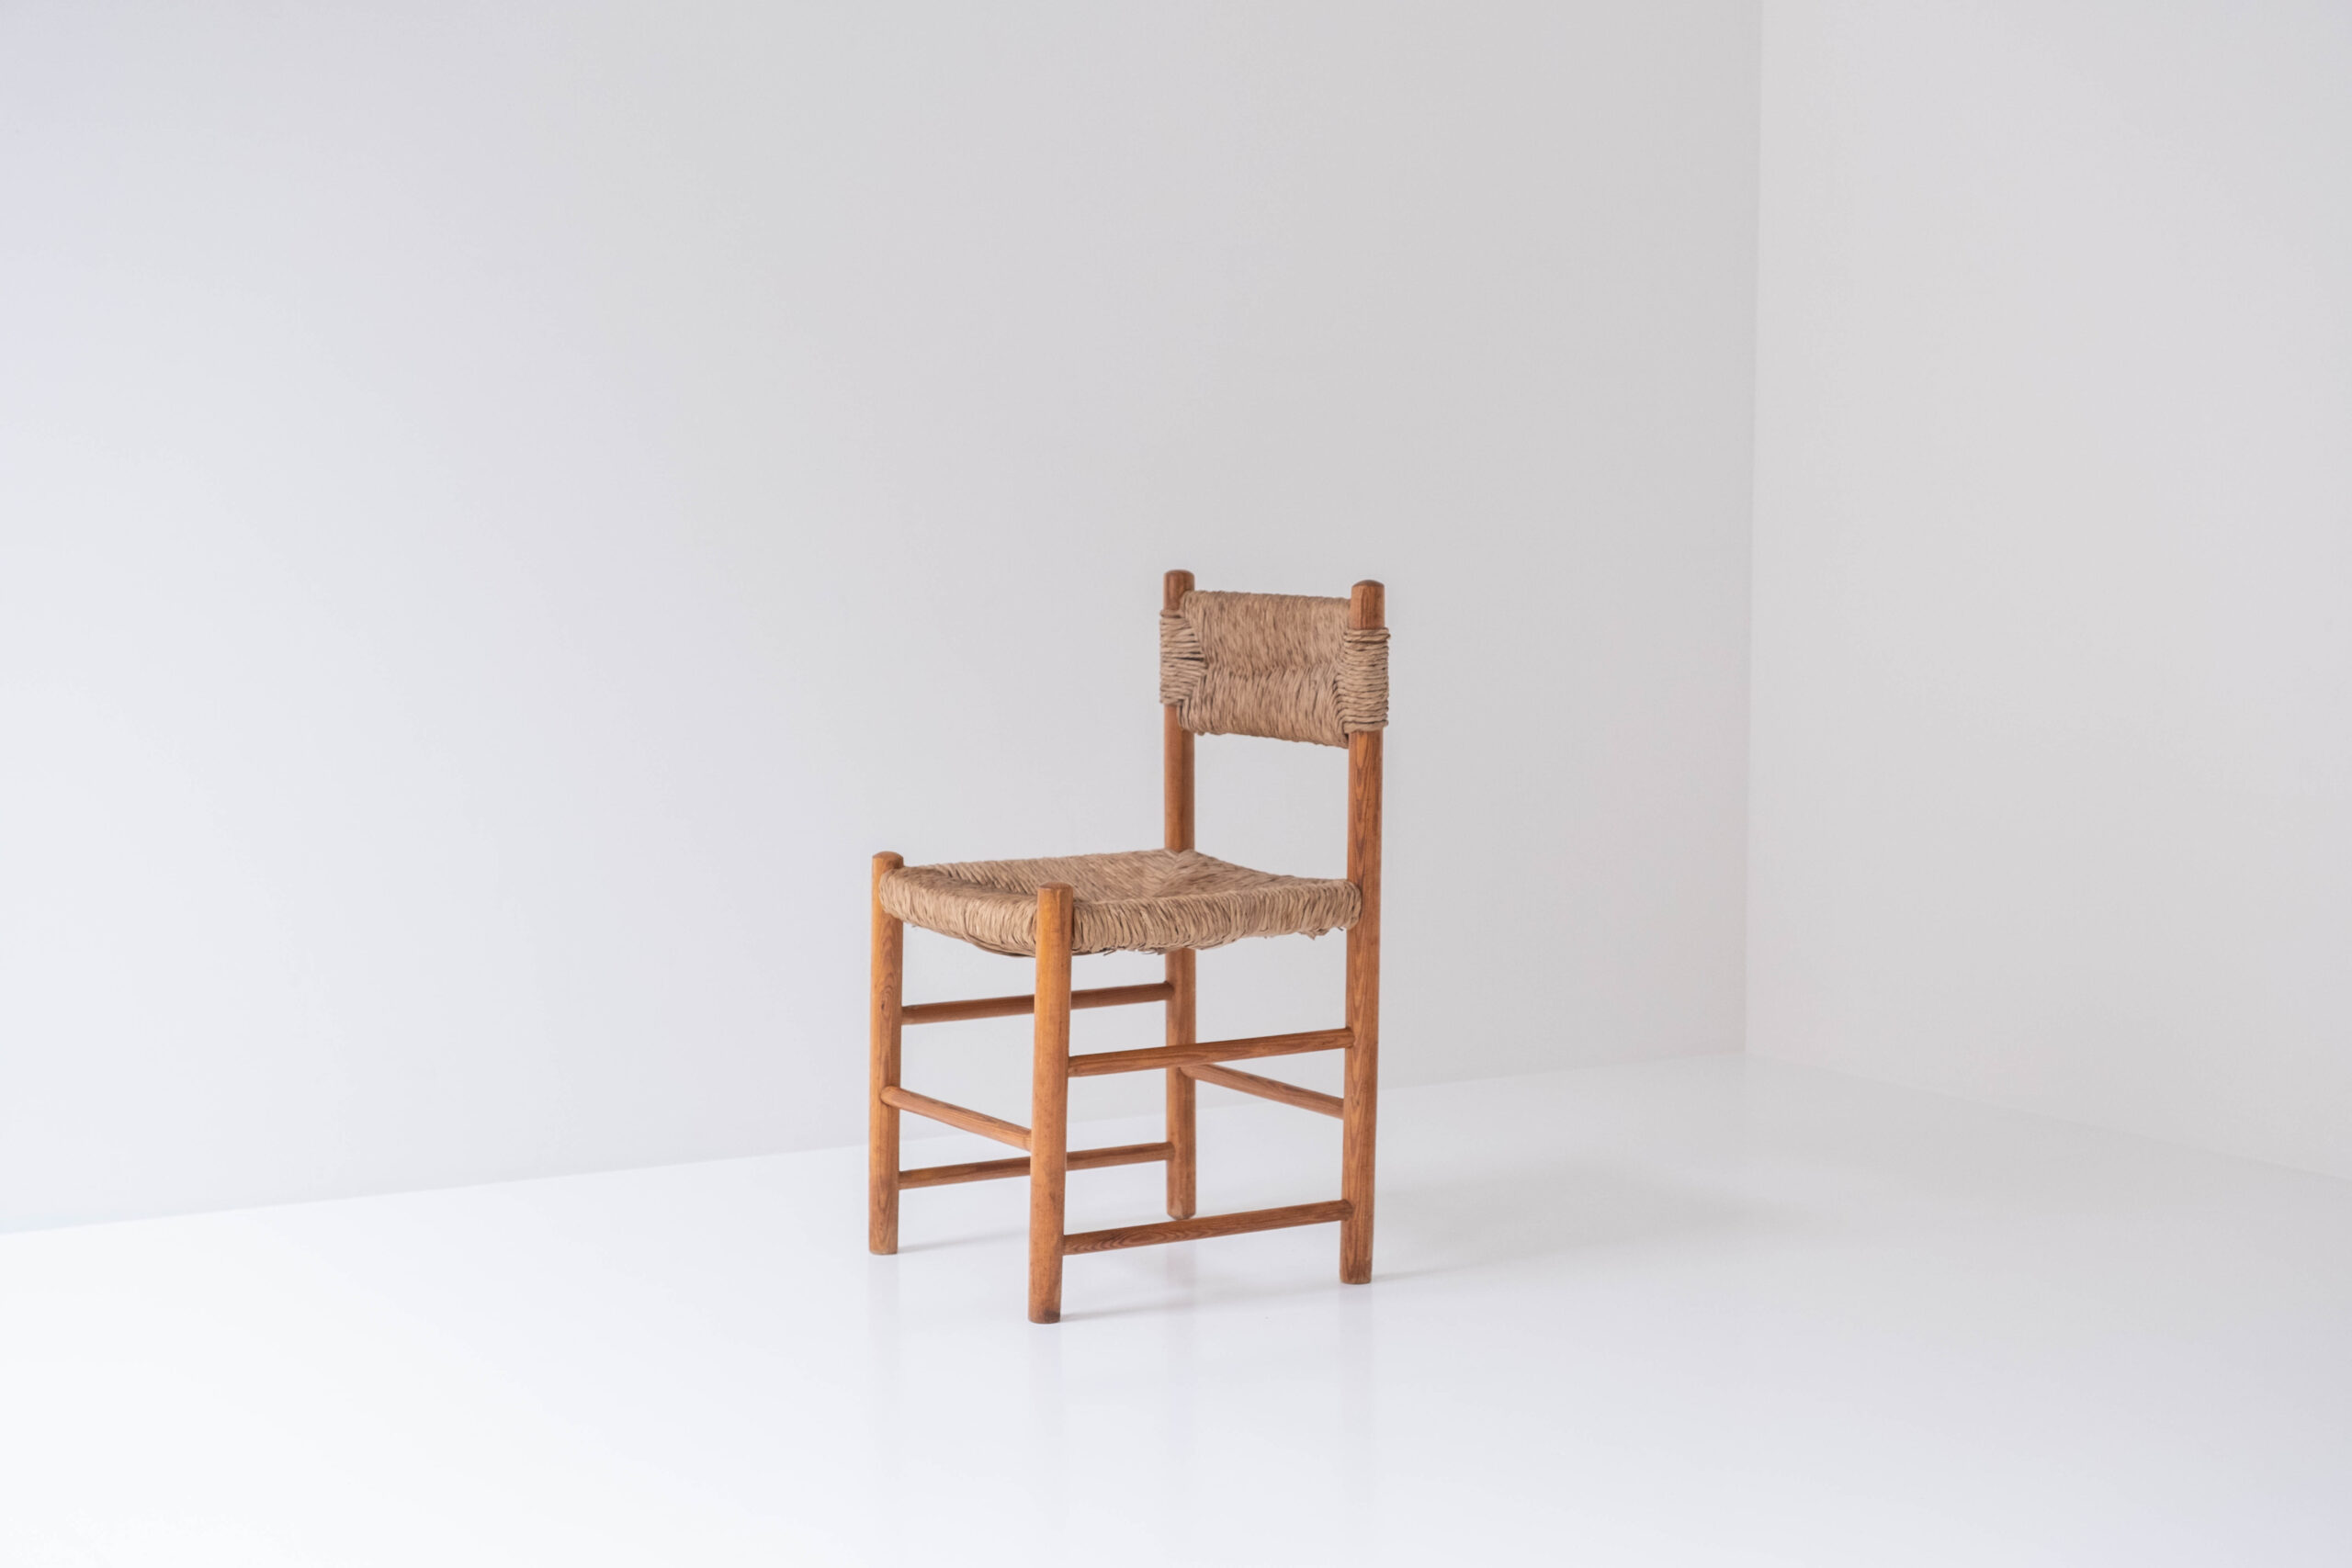 Charlotte Perriand Dordogne Dining Chair - Natural